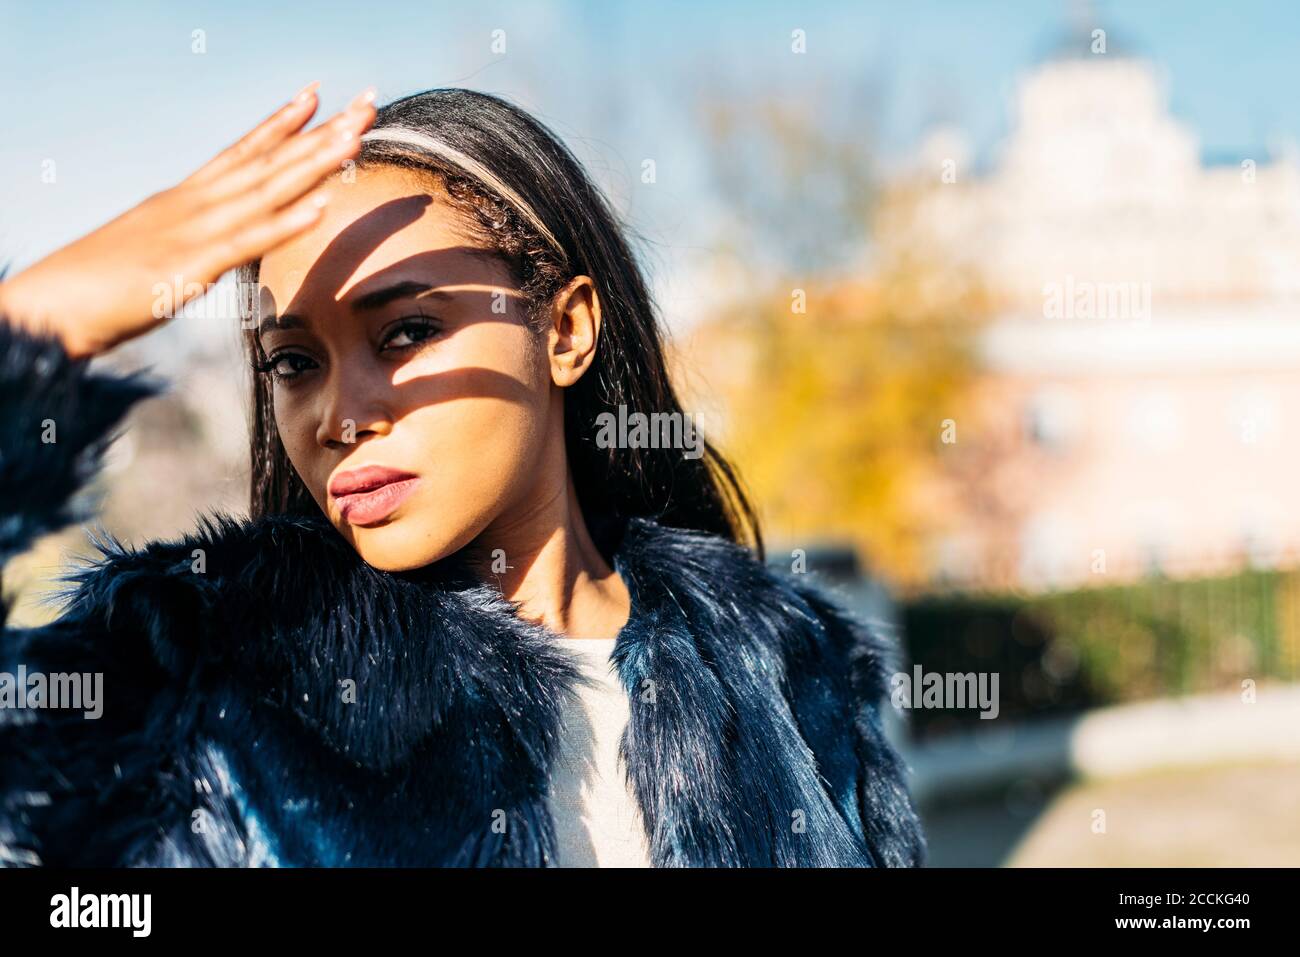 Woman protecting face from sunlight with hand outdoors Stock Photo